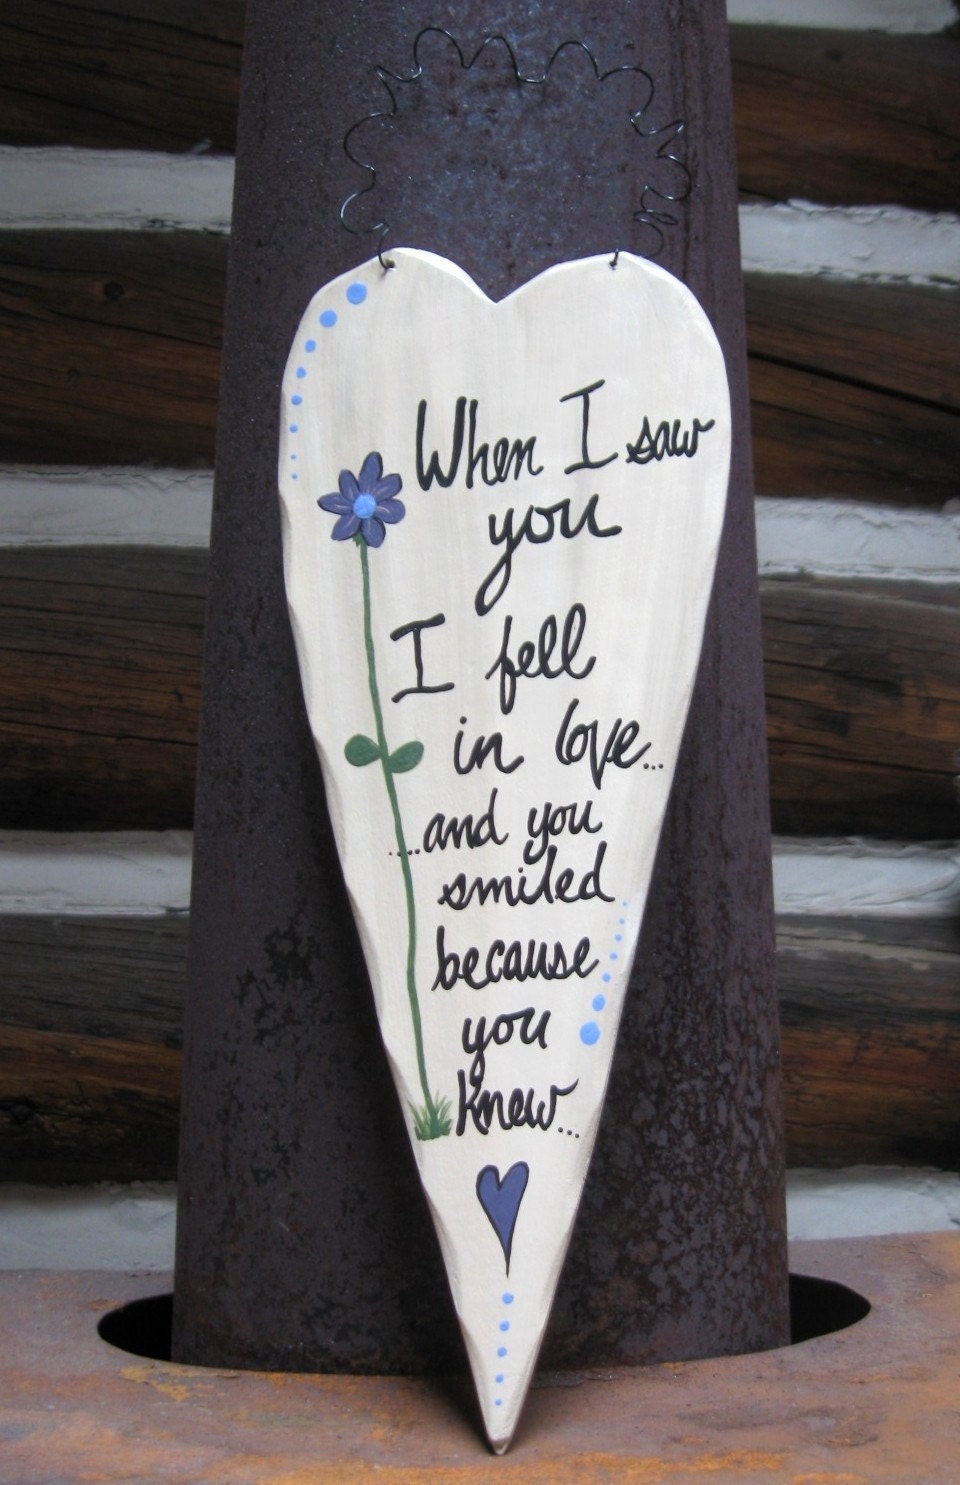 when I saw you, I fell in love - handpainted valentine